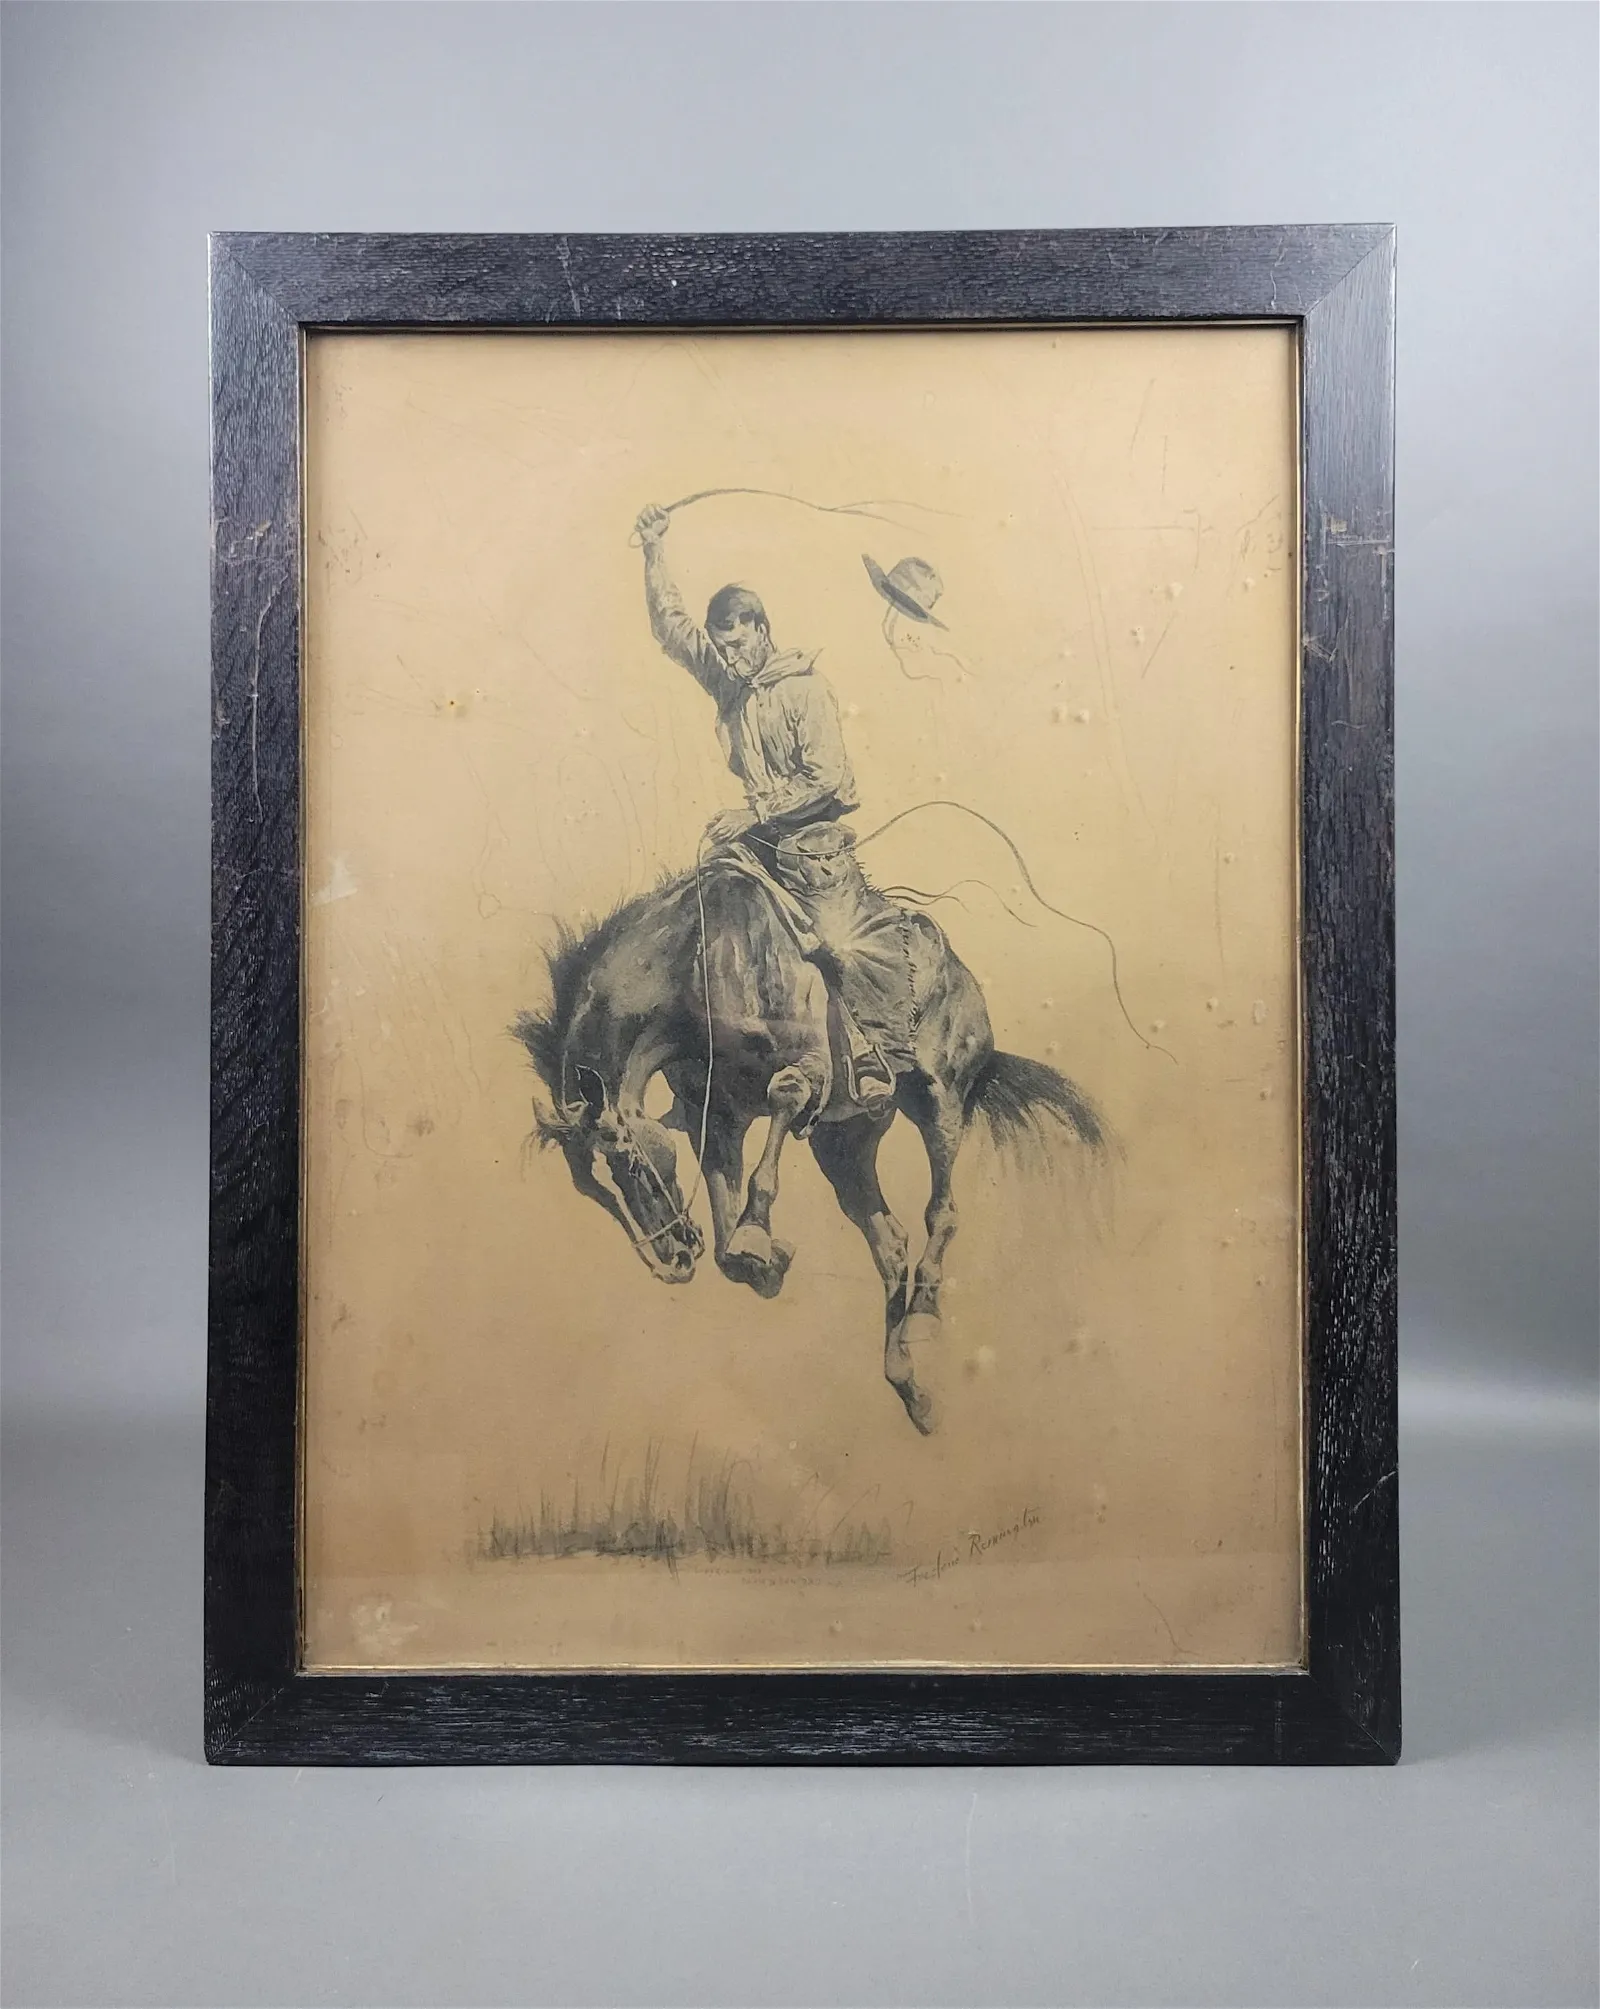 Frederic S. Remington, 'A Running Bucker,' estimated at $500-$700 at Quinn's.